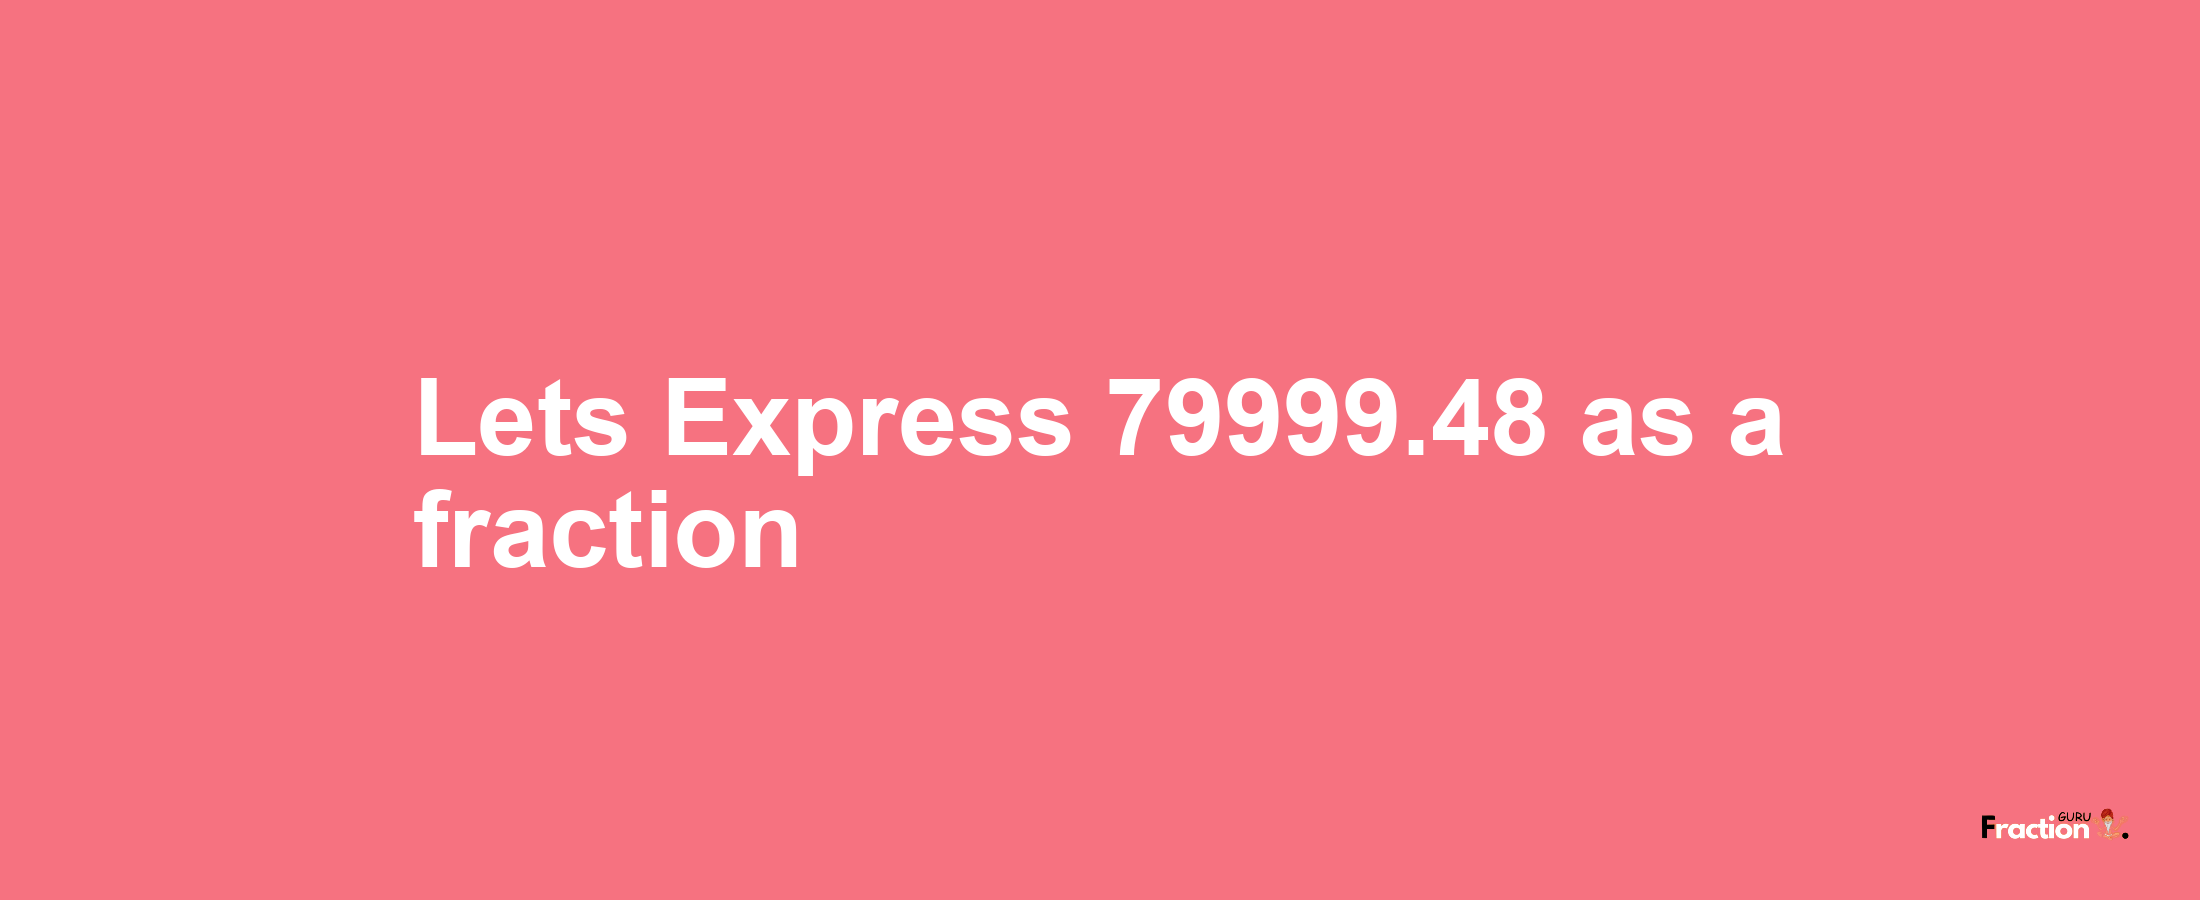 Lets Express 79999.48 as afraction